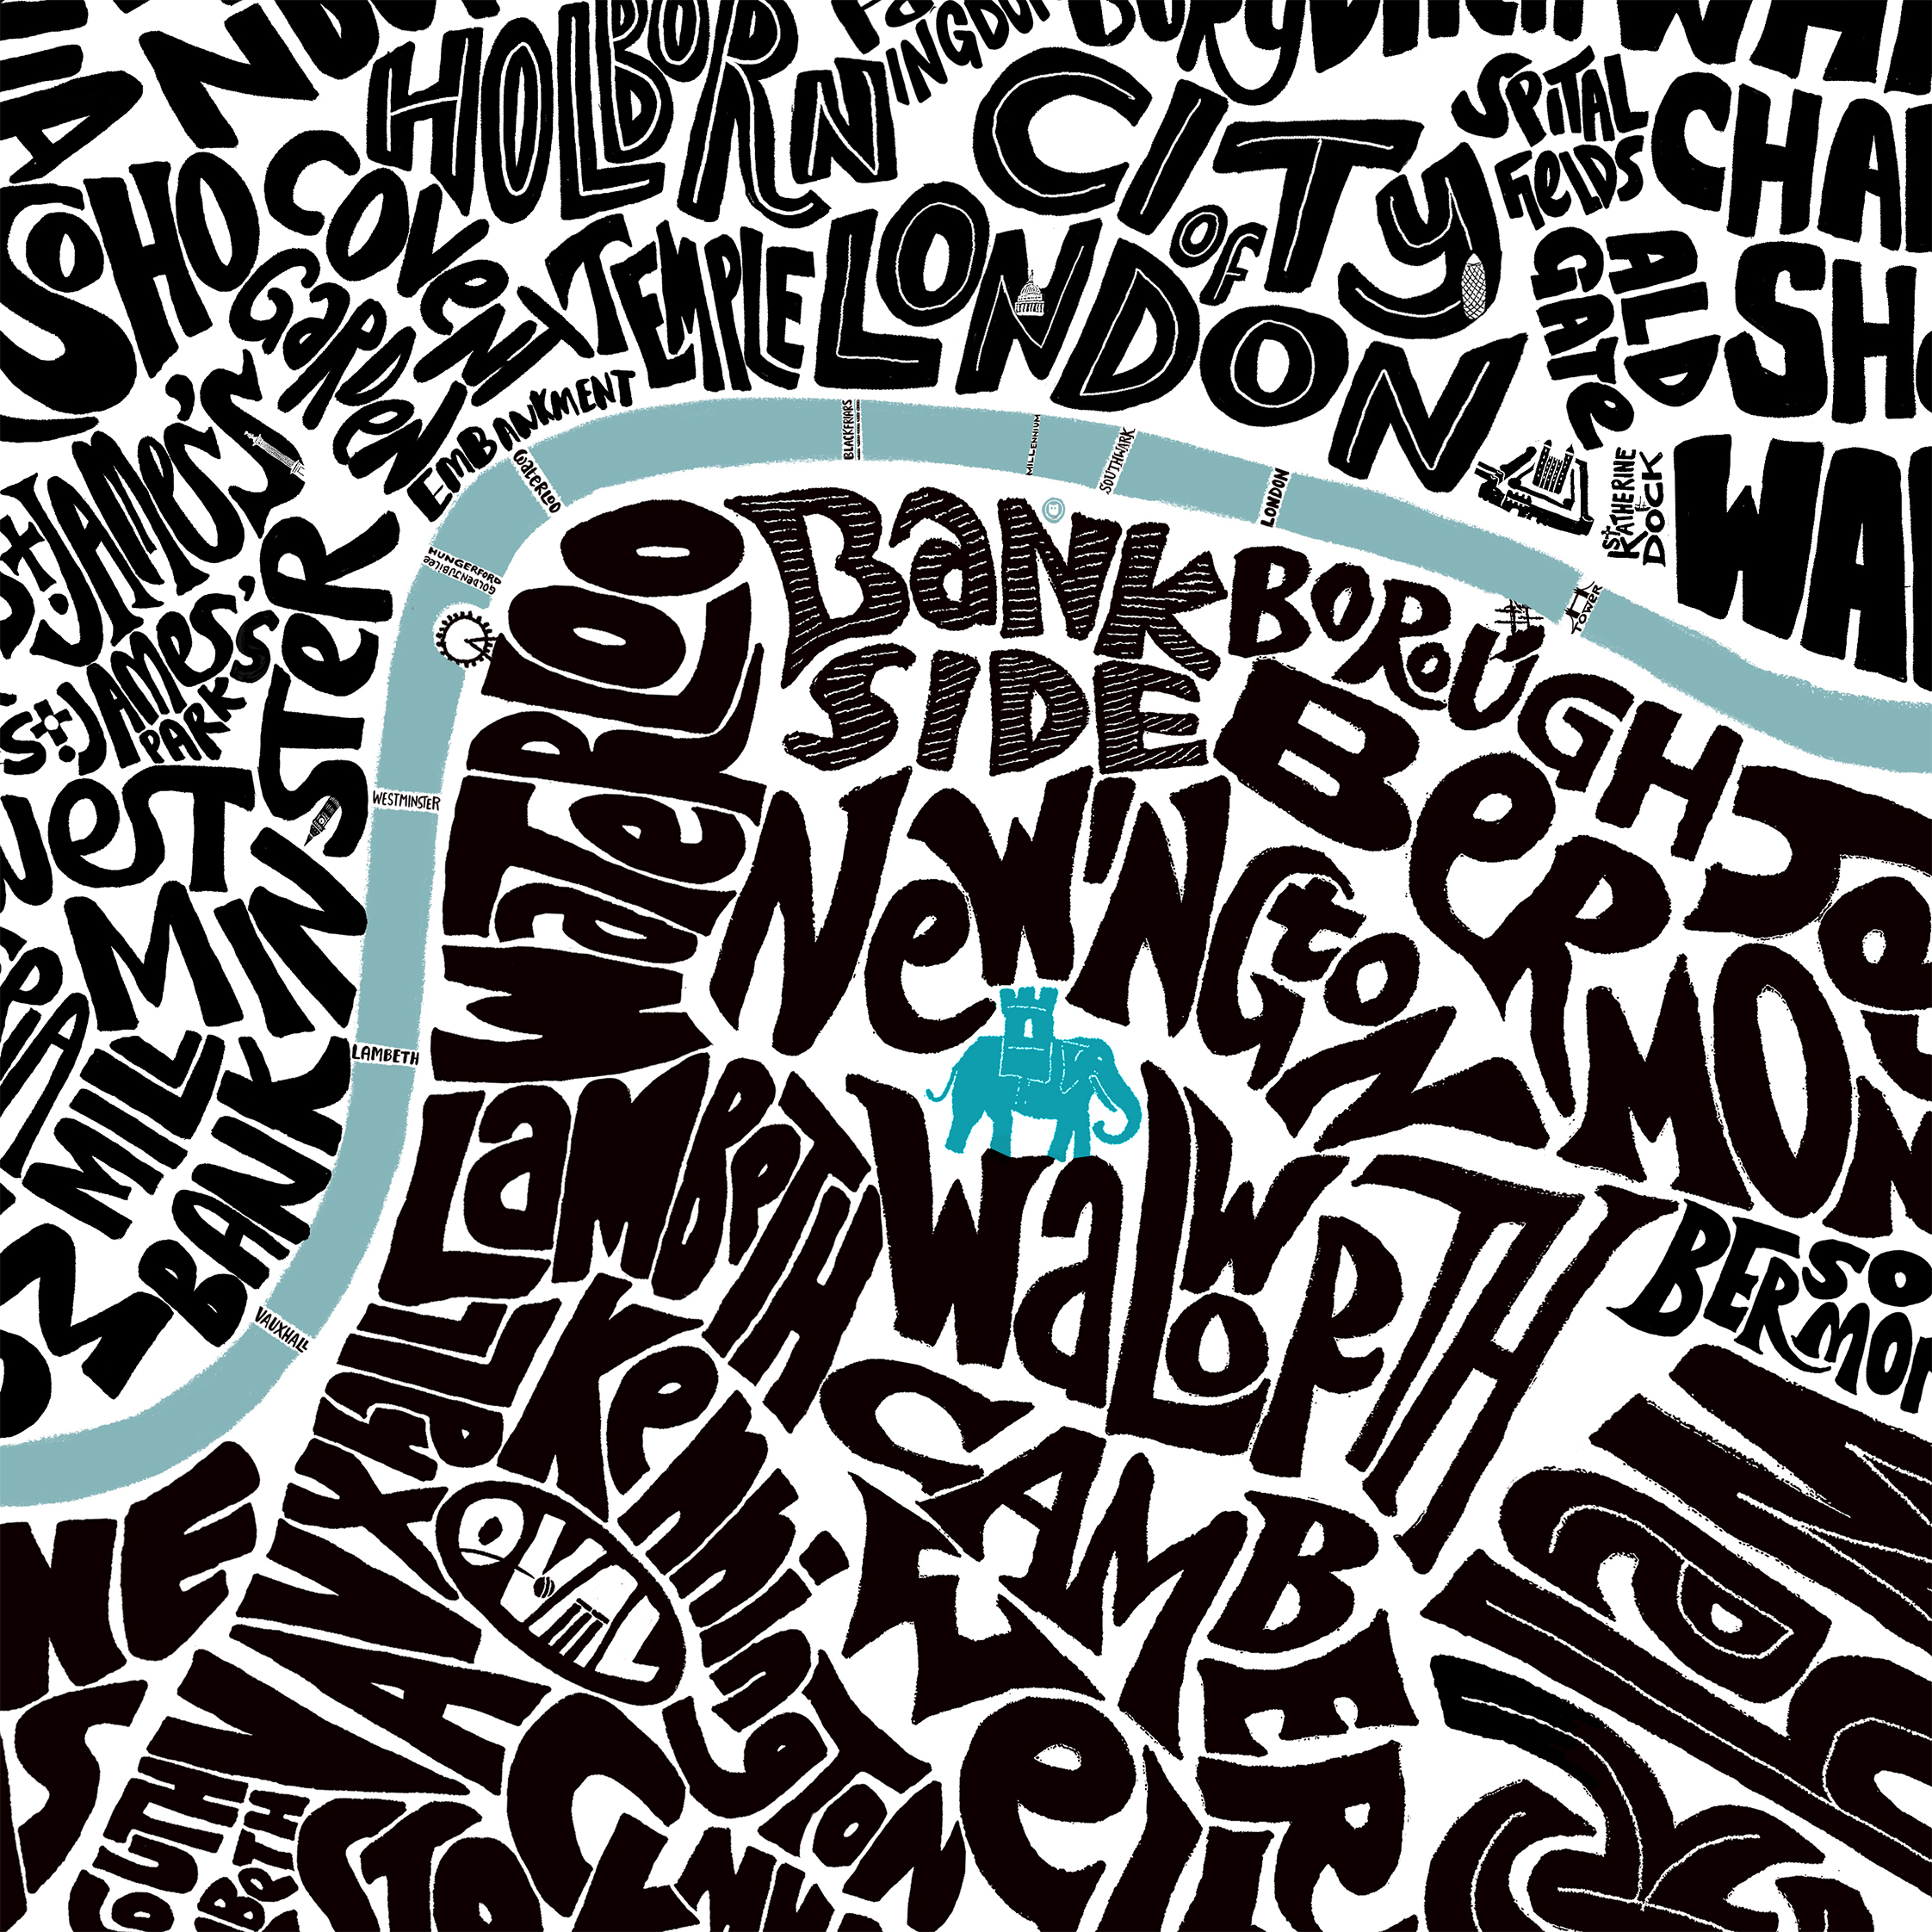 Detail of the Big London hand drawn map - South London